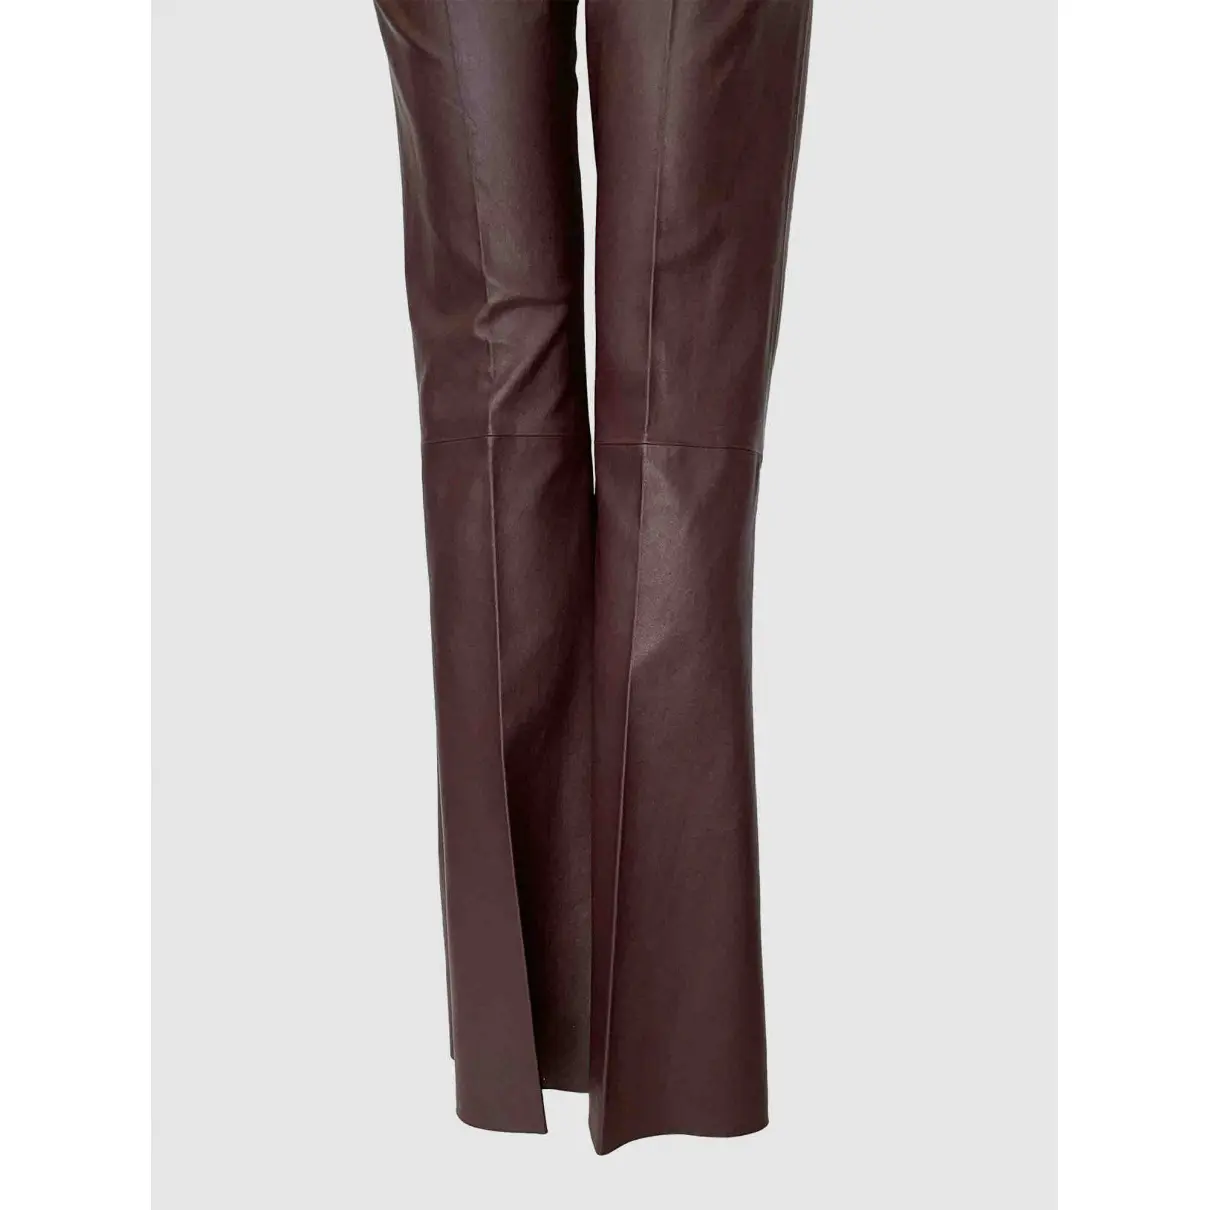 Leather trousers by Malene Birger